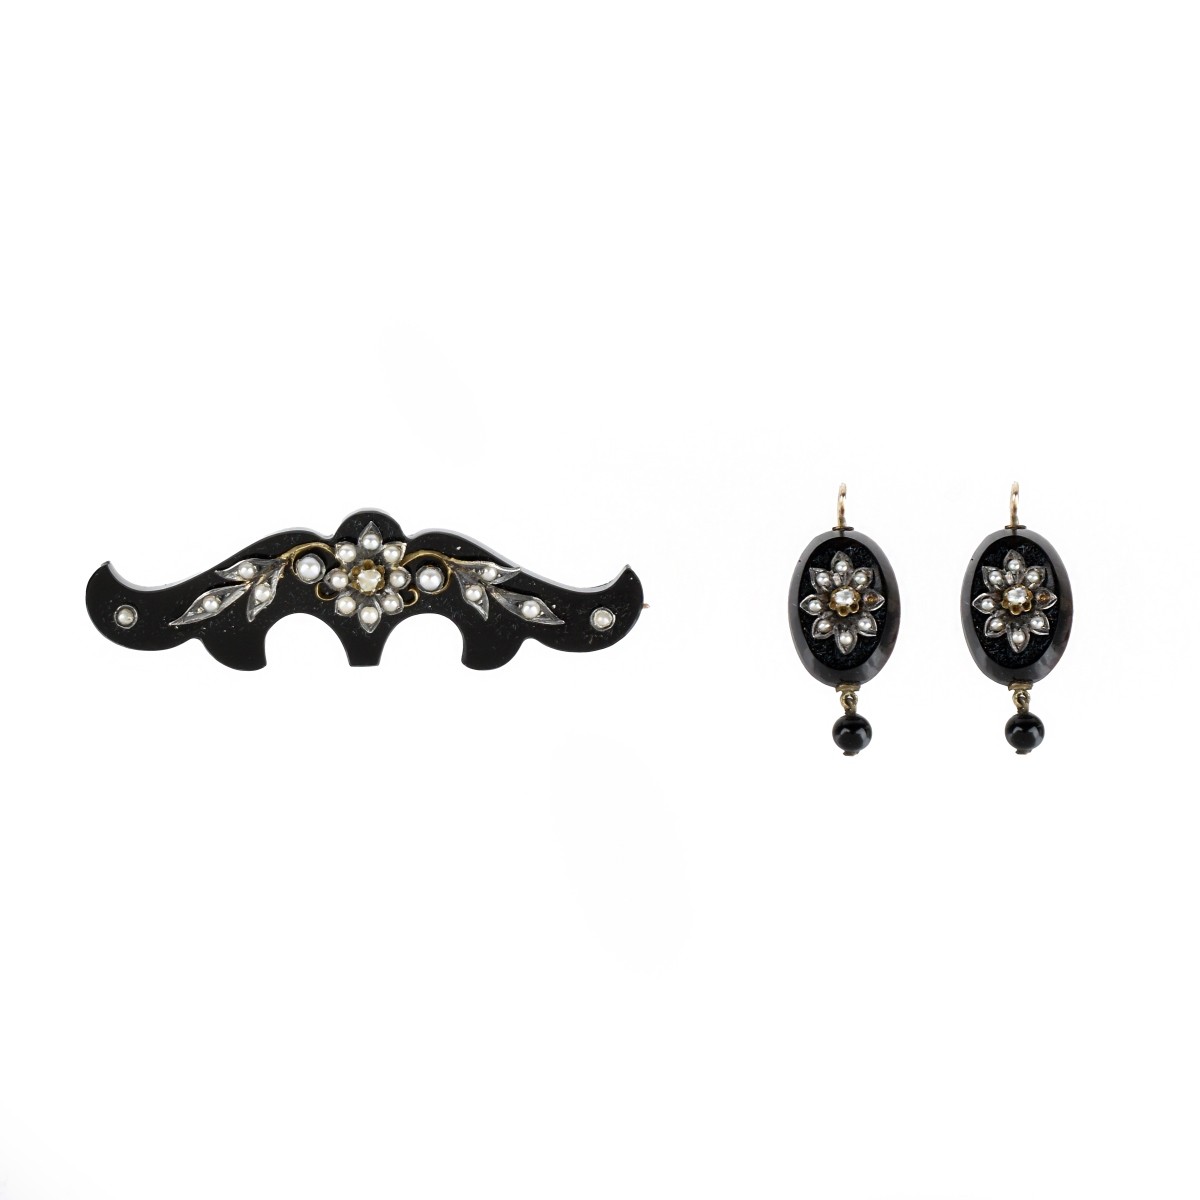 Victorian Mourning Jewelry